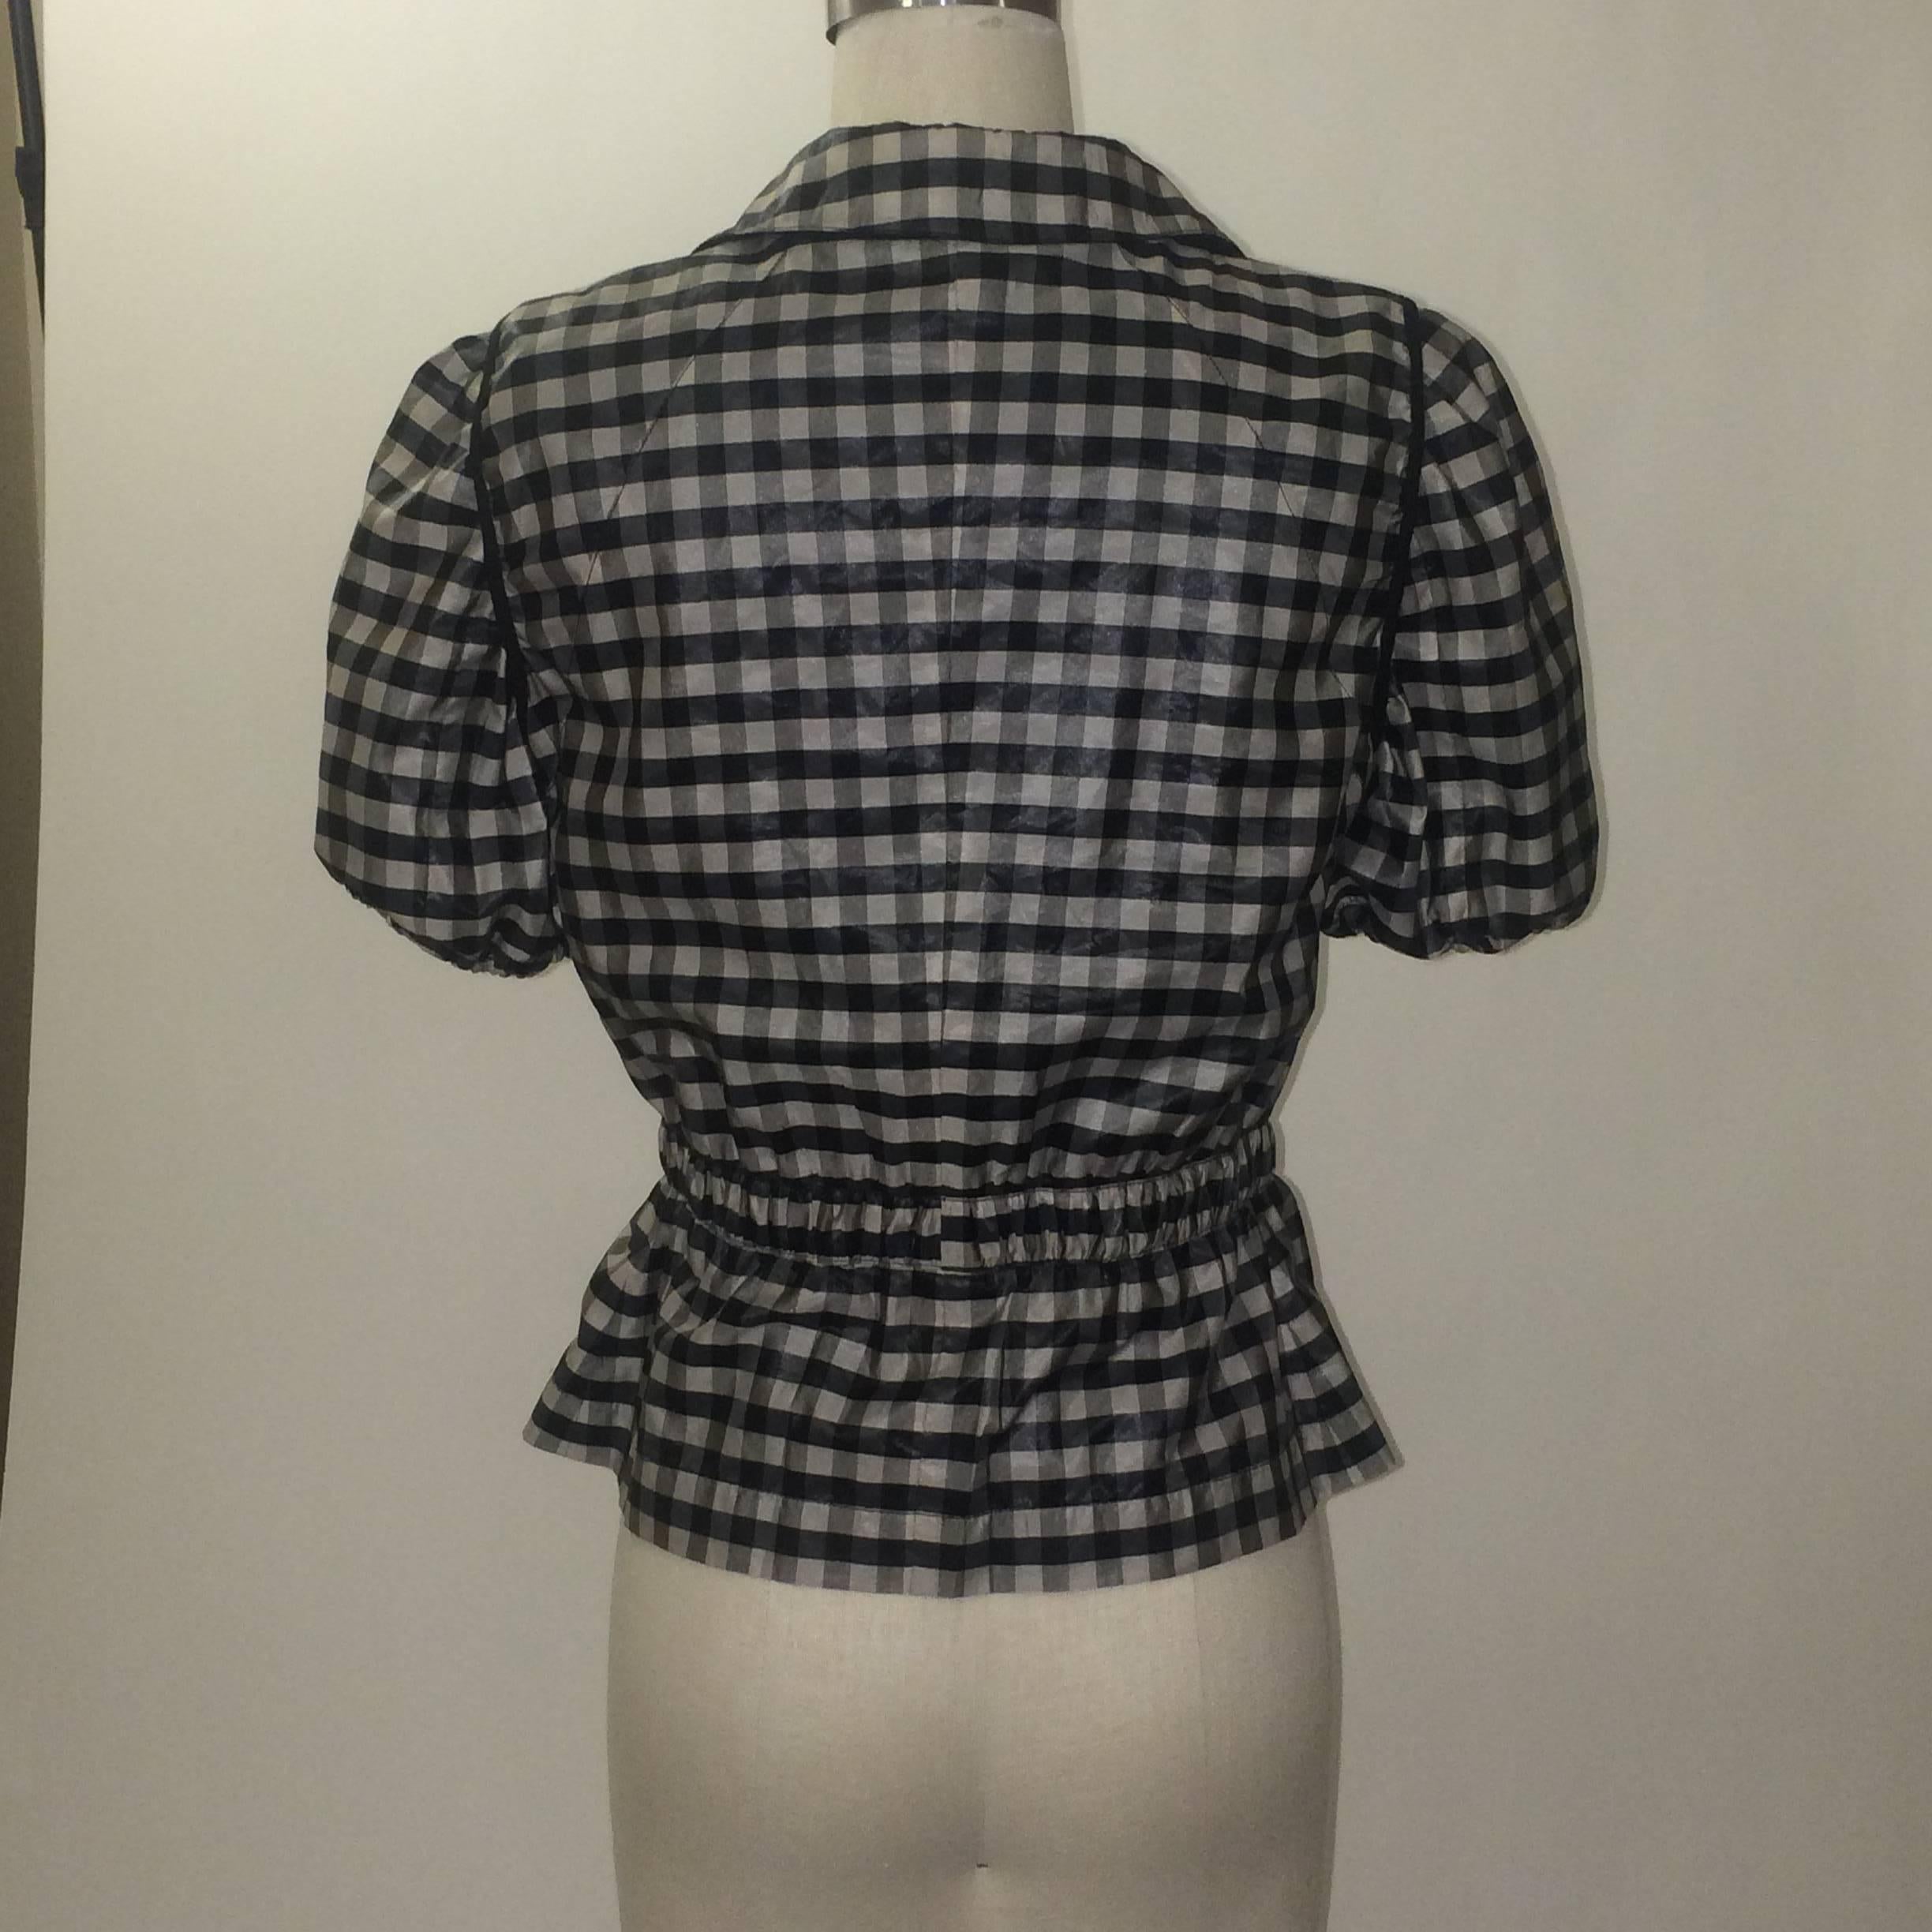 Armani Collezioni short sleeved jacket in a very pale grey and black checked pattern. Elastic at hem of short sleeves. Zips and snaps up front with adjustable hidden elastic at waist. Patch pockets at front bottom. Signed 'Armani Collezioni' at